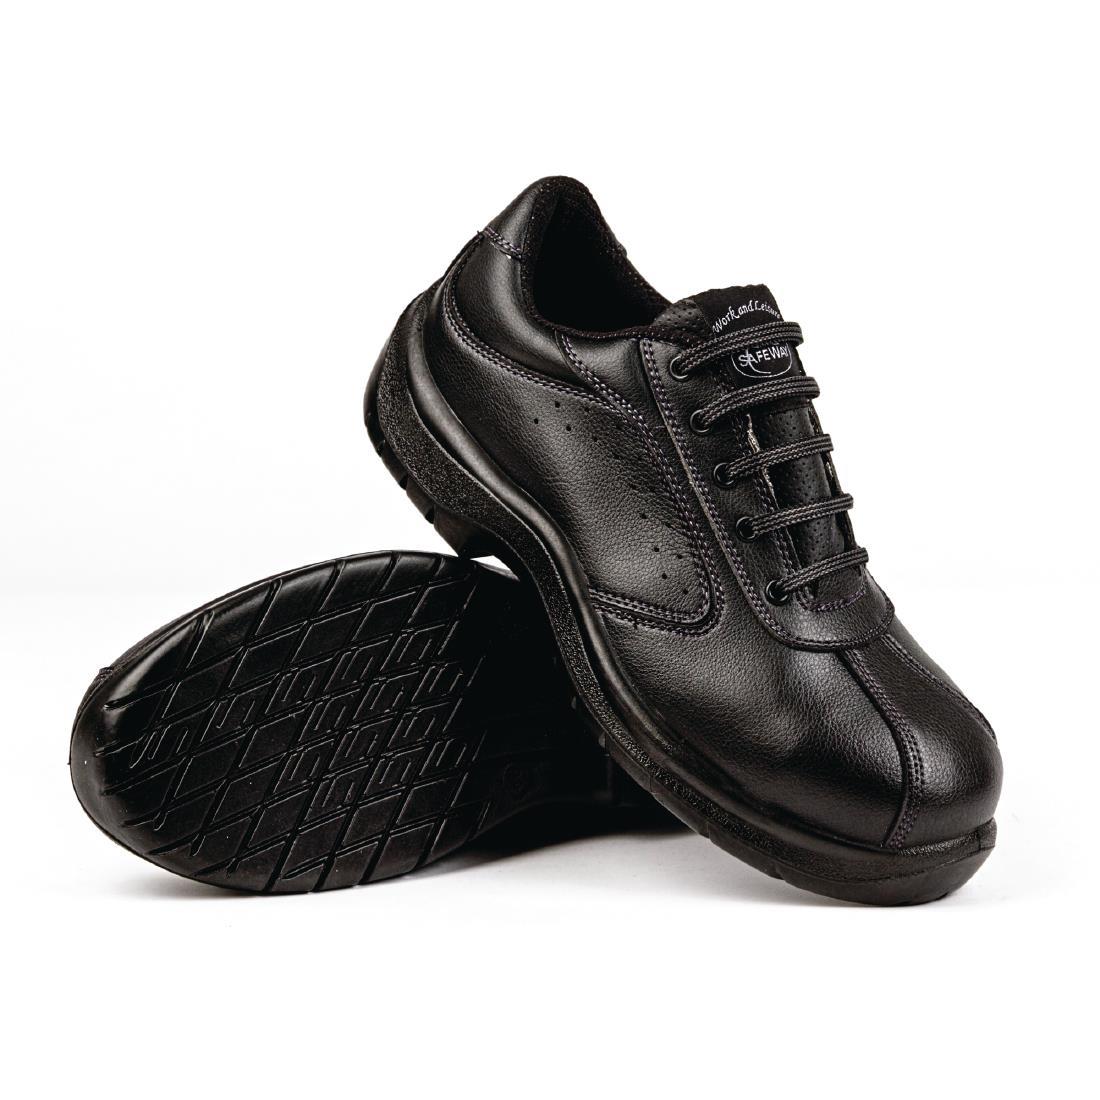 Slipbuster Side Perforated Lace Up Black 43